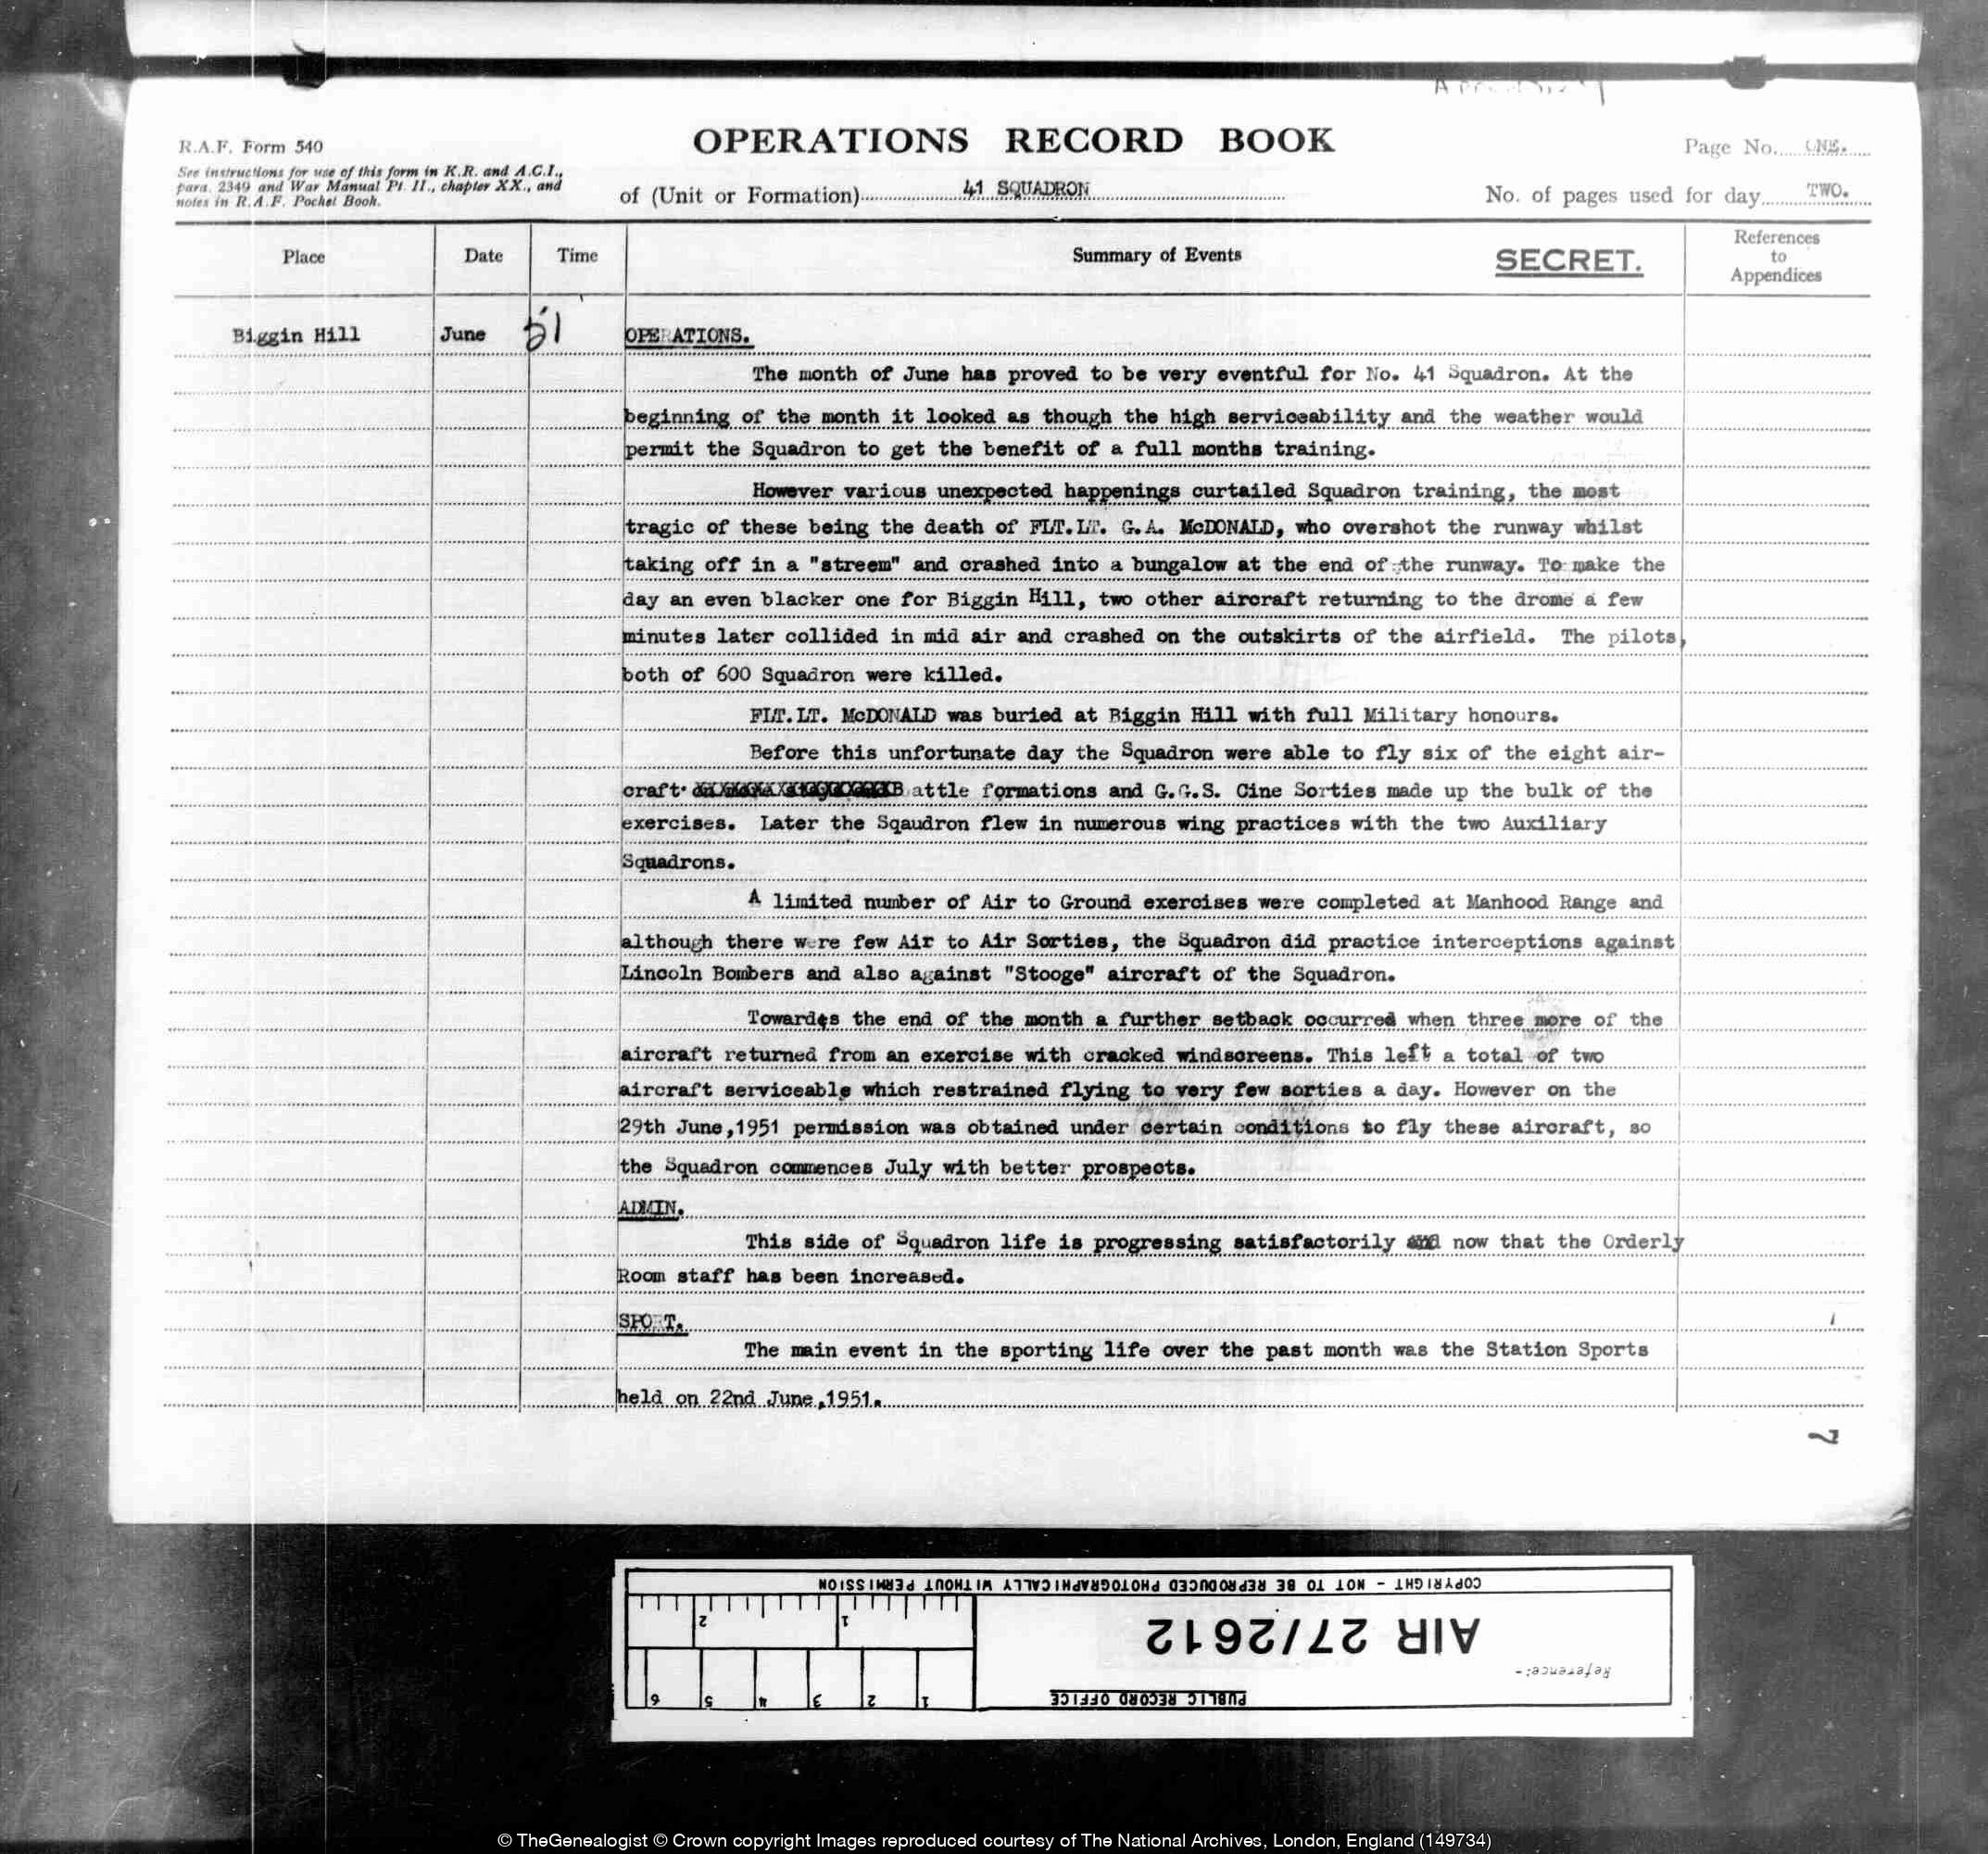 A black day for Biggin Hill recorded in the ORBs for June 1951